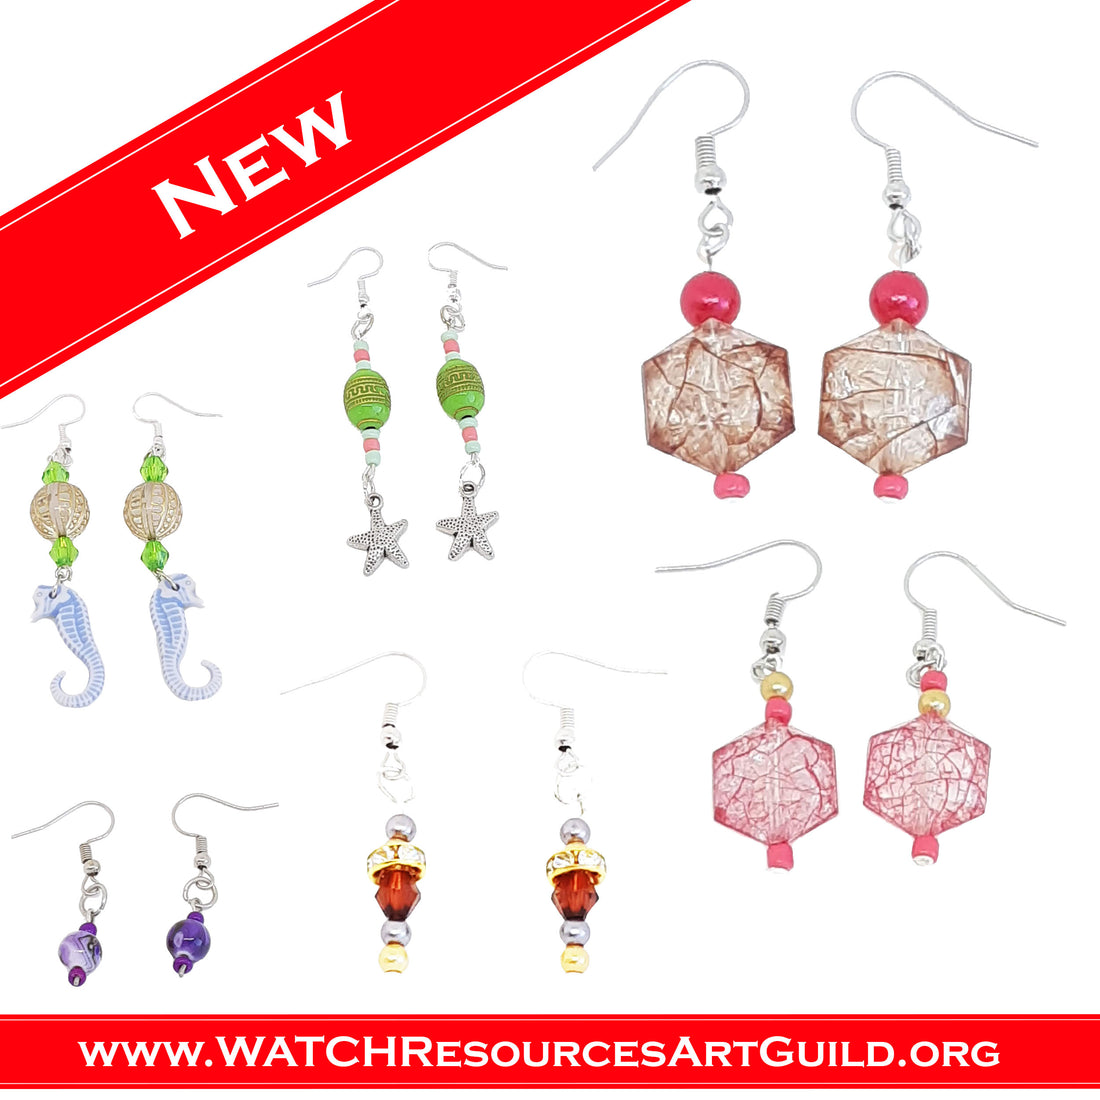 WATCH Resources Art Guild - January 2021 Features Valentine's Day Jewelry